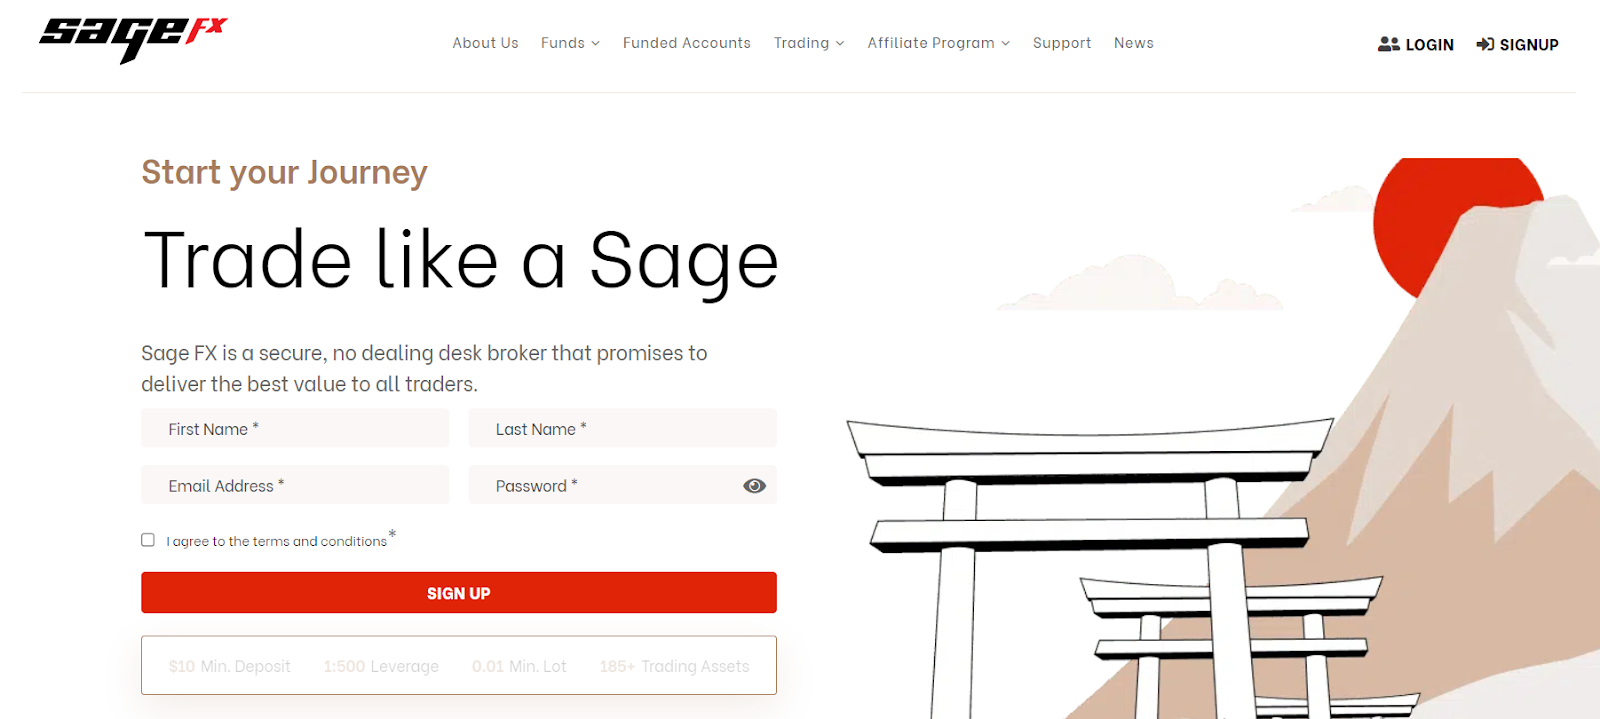 Review of Sage FX’s User Account — Registration